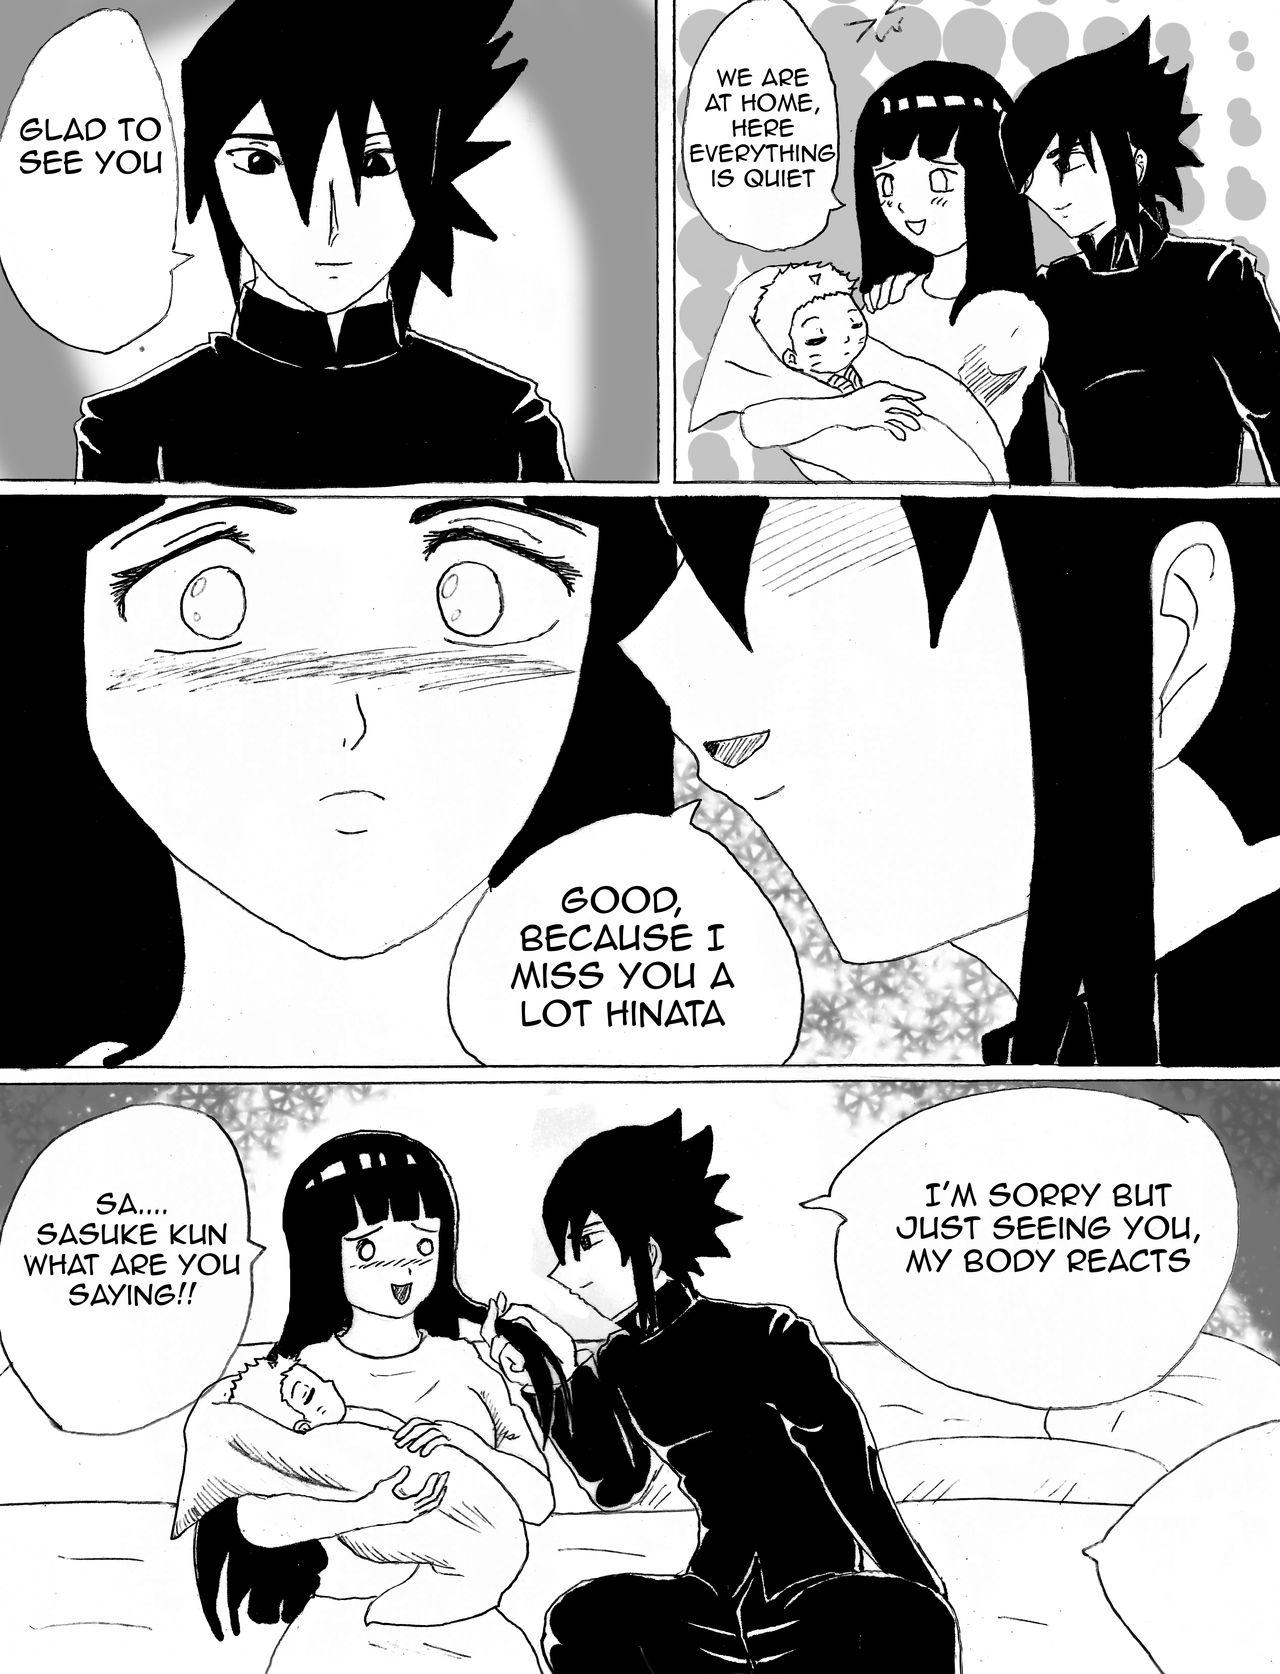 Girl Girl A life without you, The hidden - Naruto Fishnet - Page 4